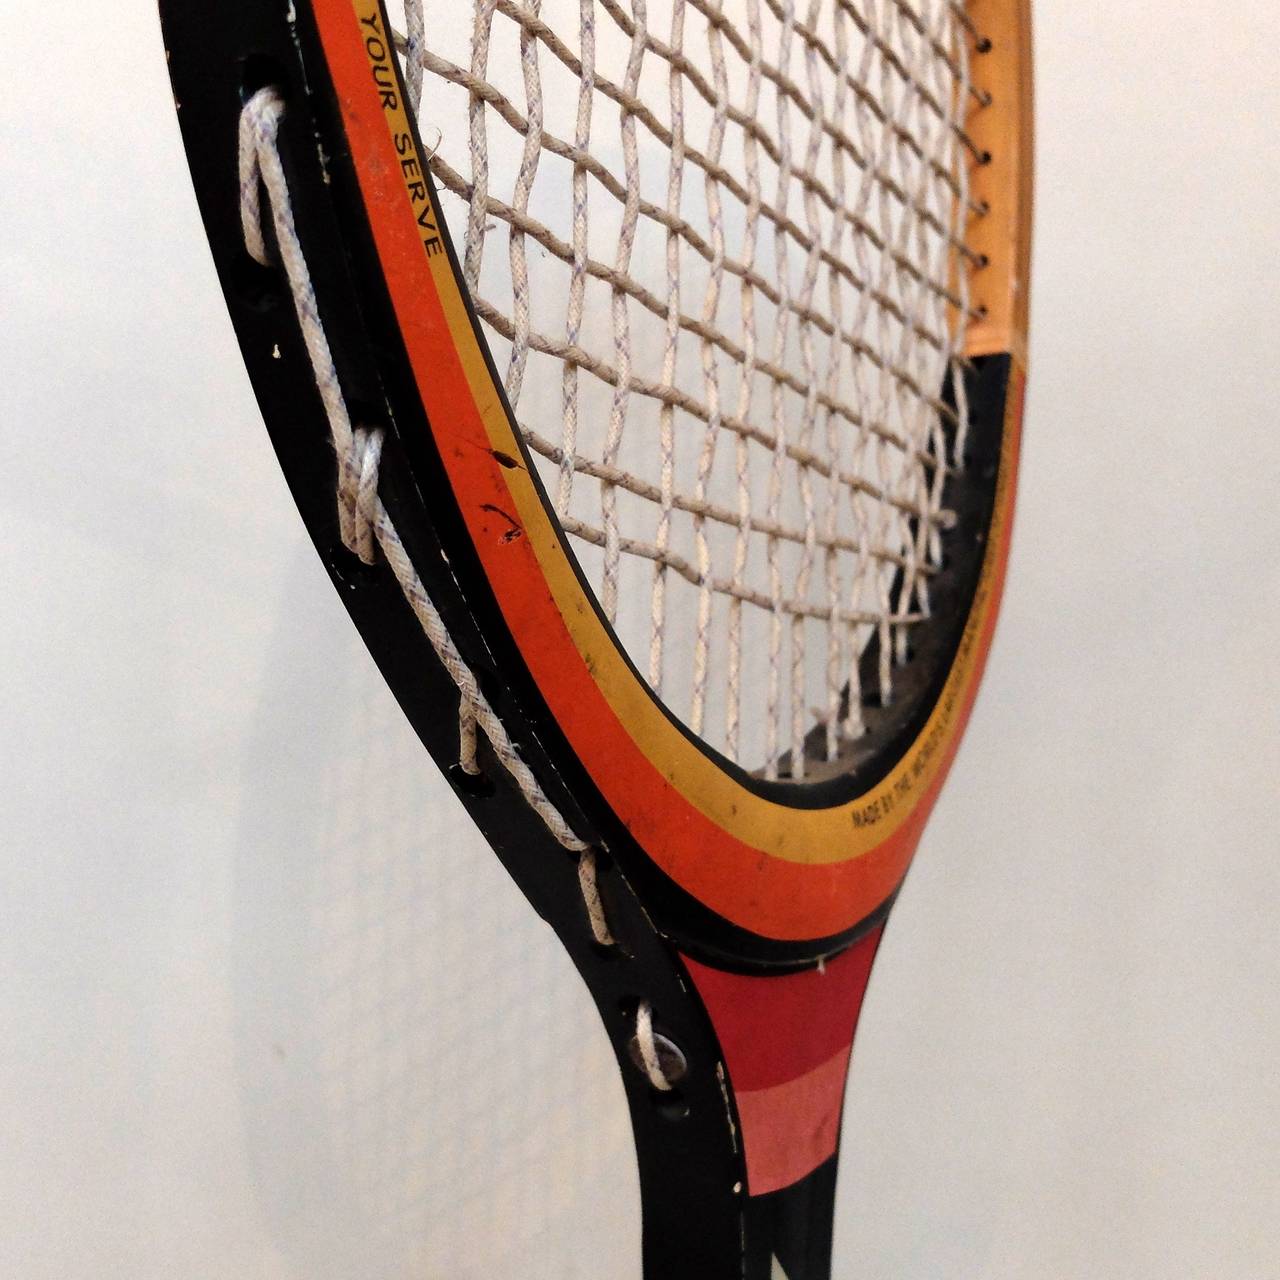 Giant size Donnay tennis racquet, an exact upscaled version of a regular tennis racquet. This would have been used as an advertising or shop display piece.